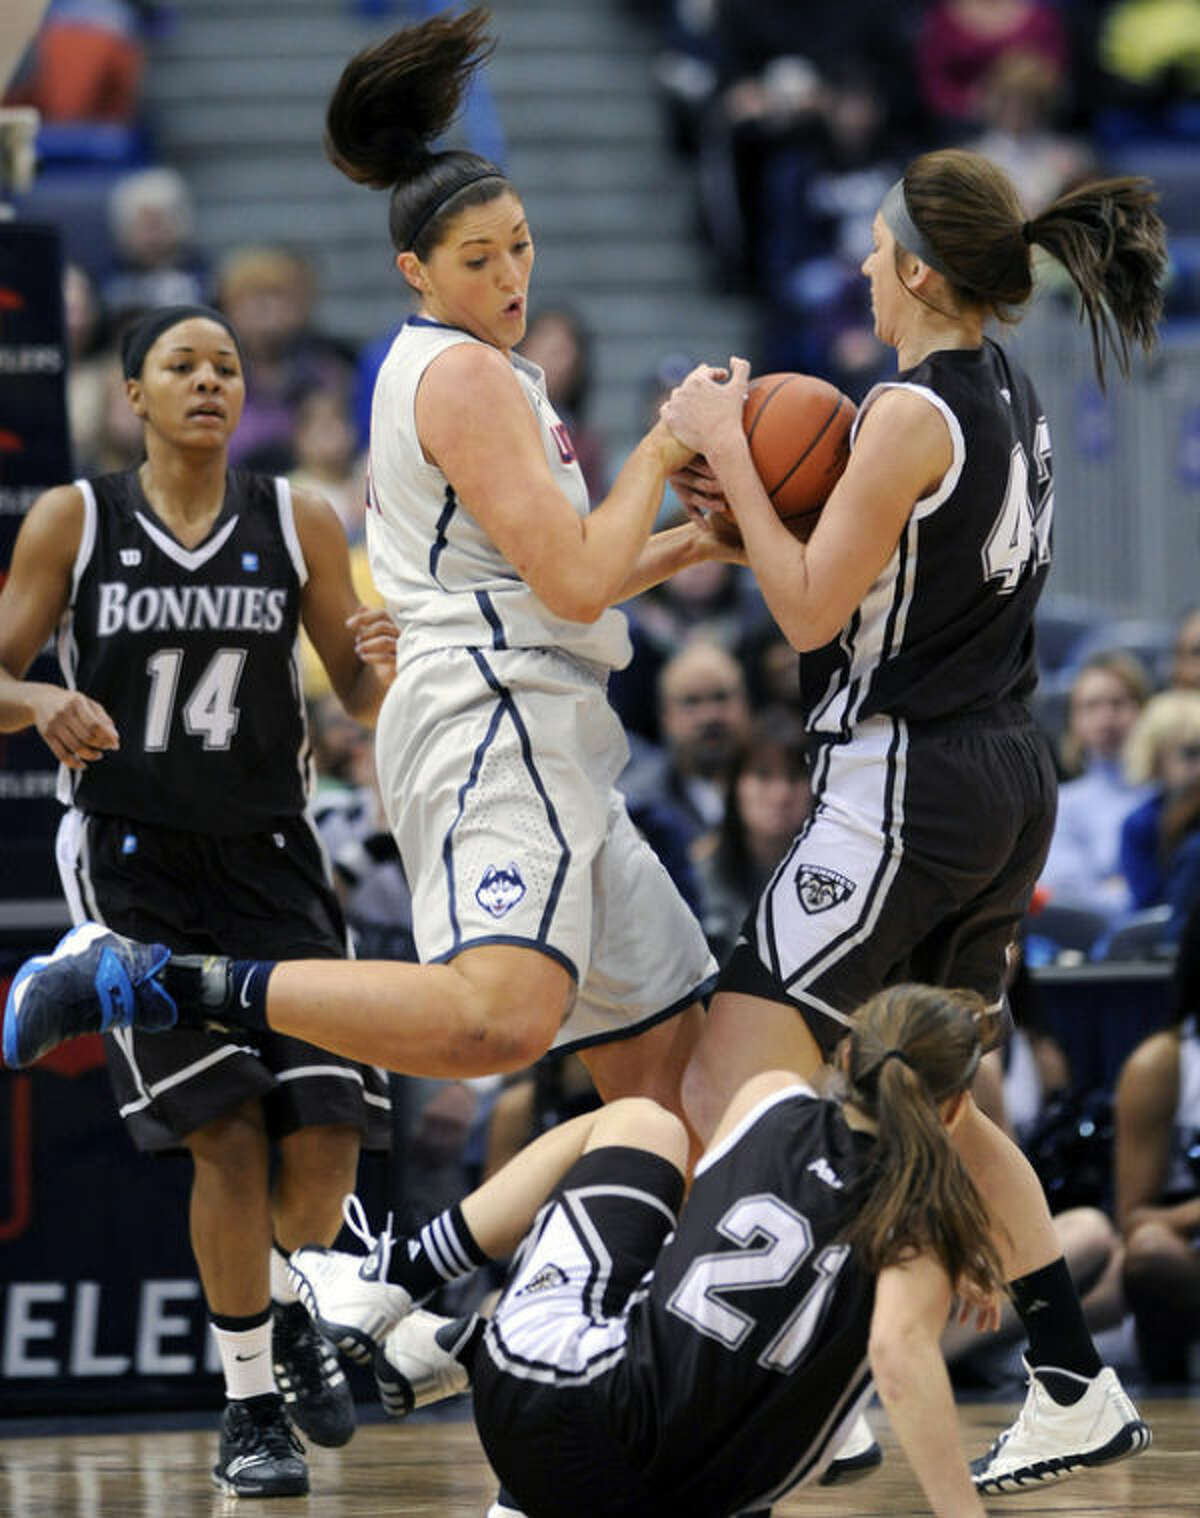 Connecticut's Stefanie Dolson, second from left, fights for a rebound with St. Bonaventure's Katie Healy, right, as St. Bonaventure's Nyla Rueter (21) and Gabby Richmond (14) stand by during the first half of an NCAA college basketball game in Hartford, Conn., on Sunday, Nov. 24, 2013. (AP Photo/Fred Beckham)